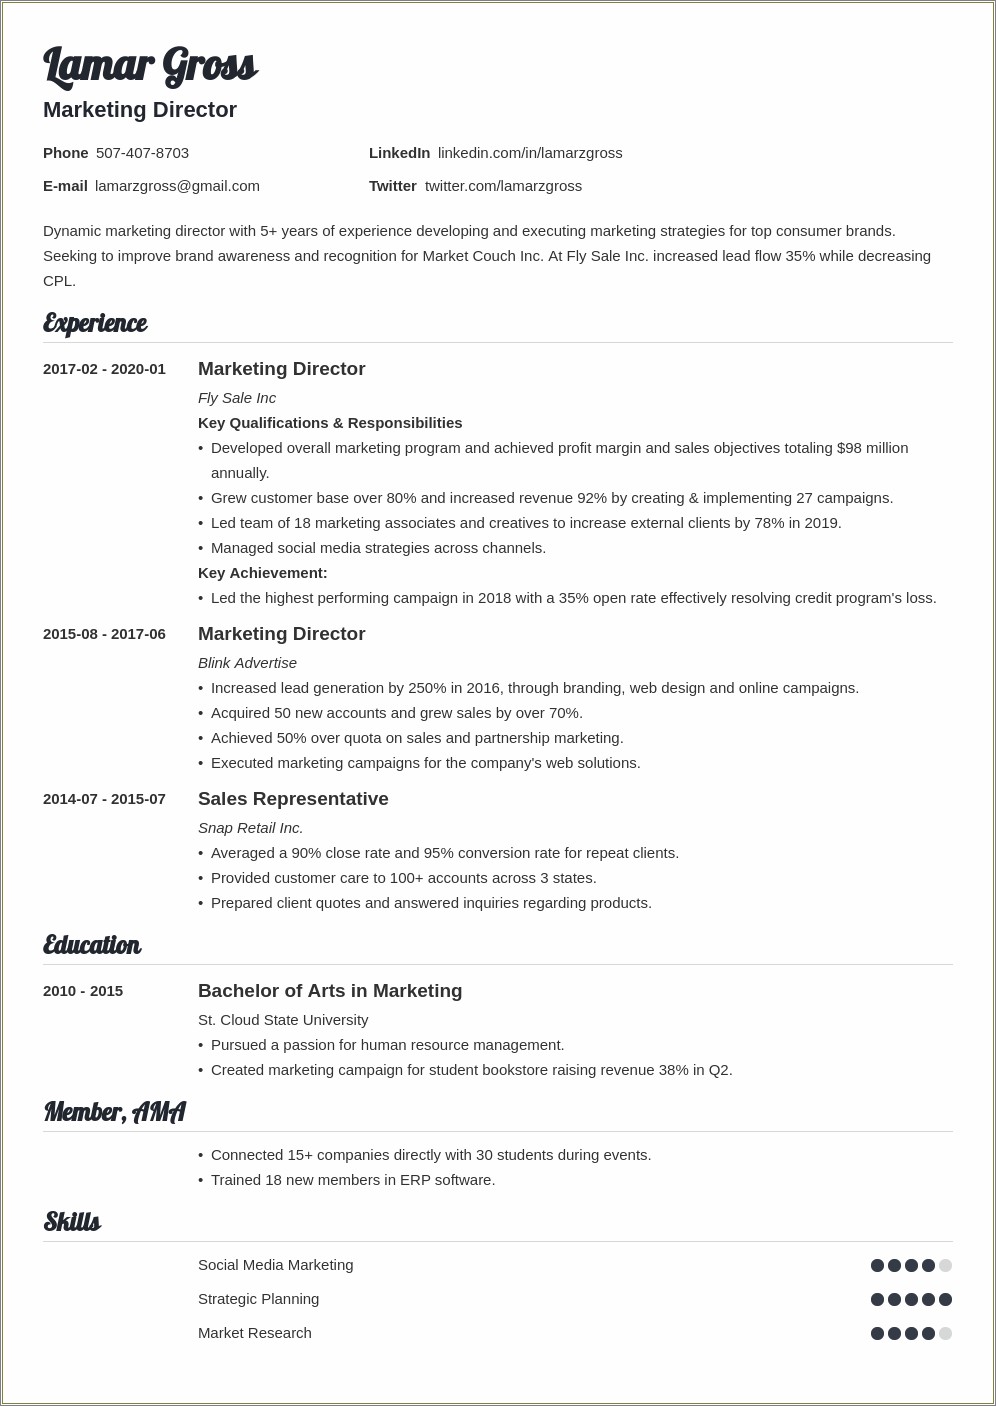 Vice President Of Marketing Resume Examples